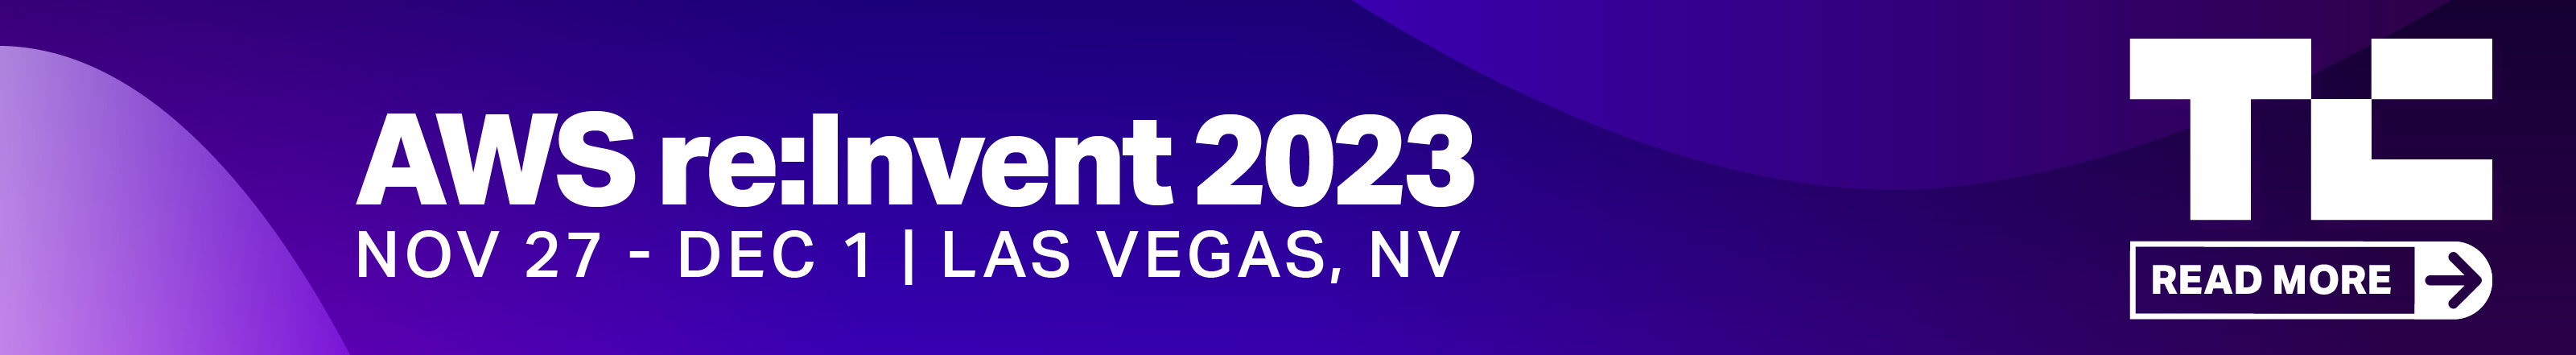 Read more about AWS re:Invent 2023 on ProWellTech